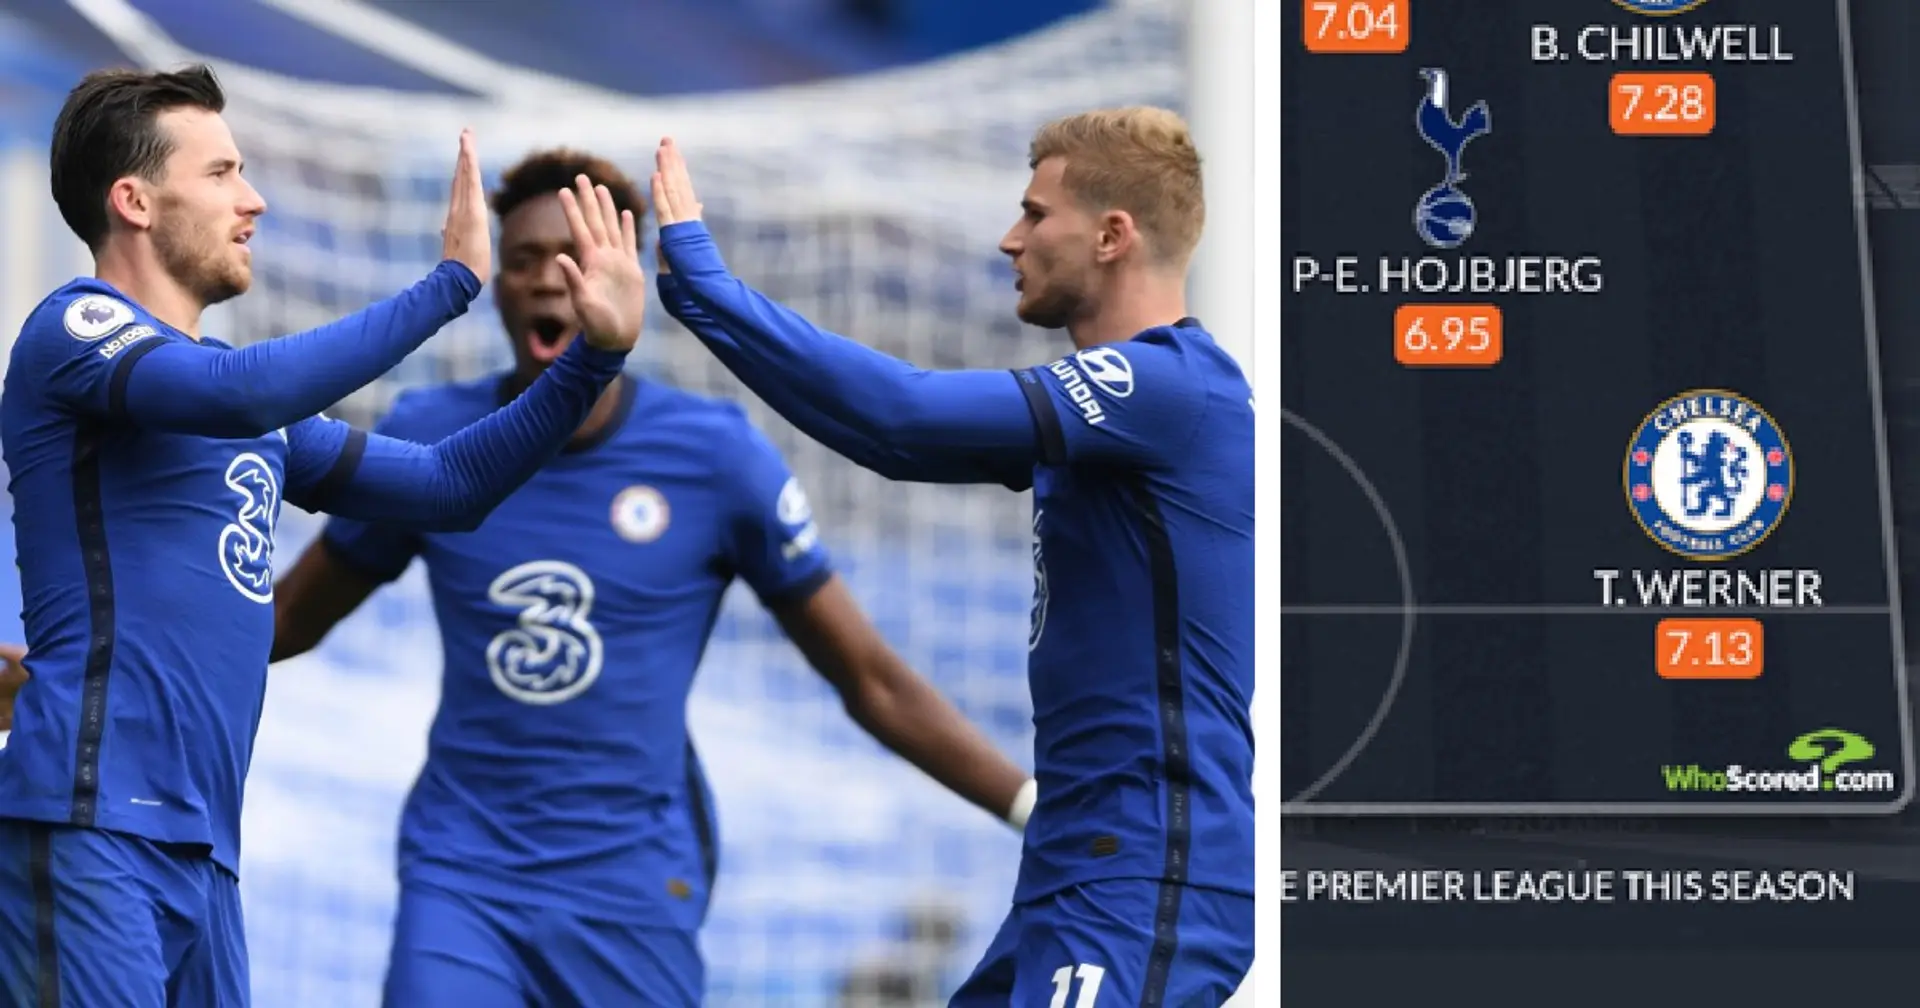 Werner, Chilwell among 3 Chelsea stars selected for WhoScored's signings of the season